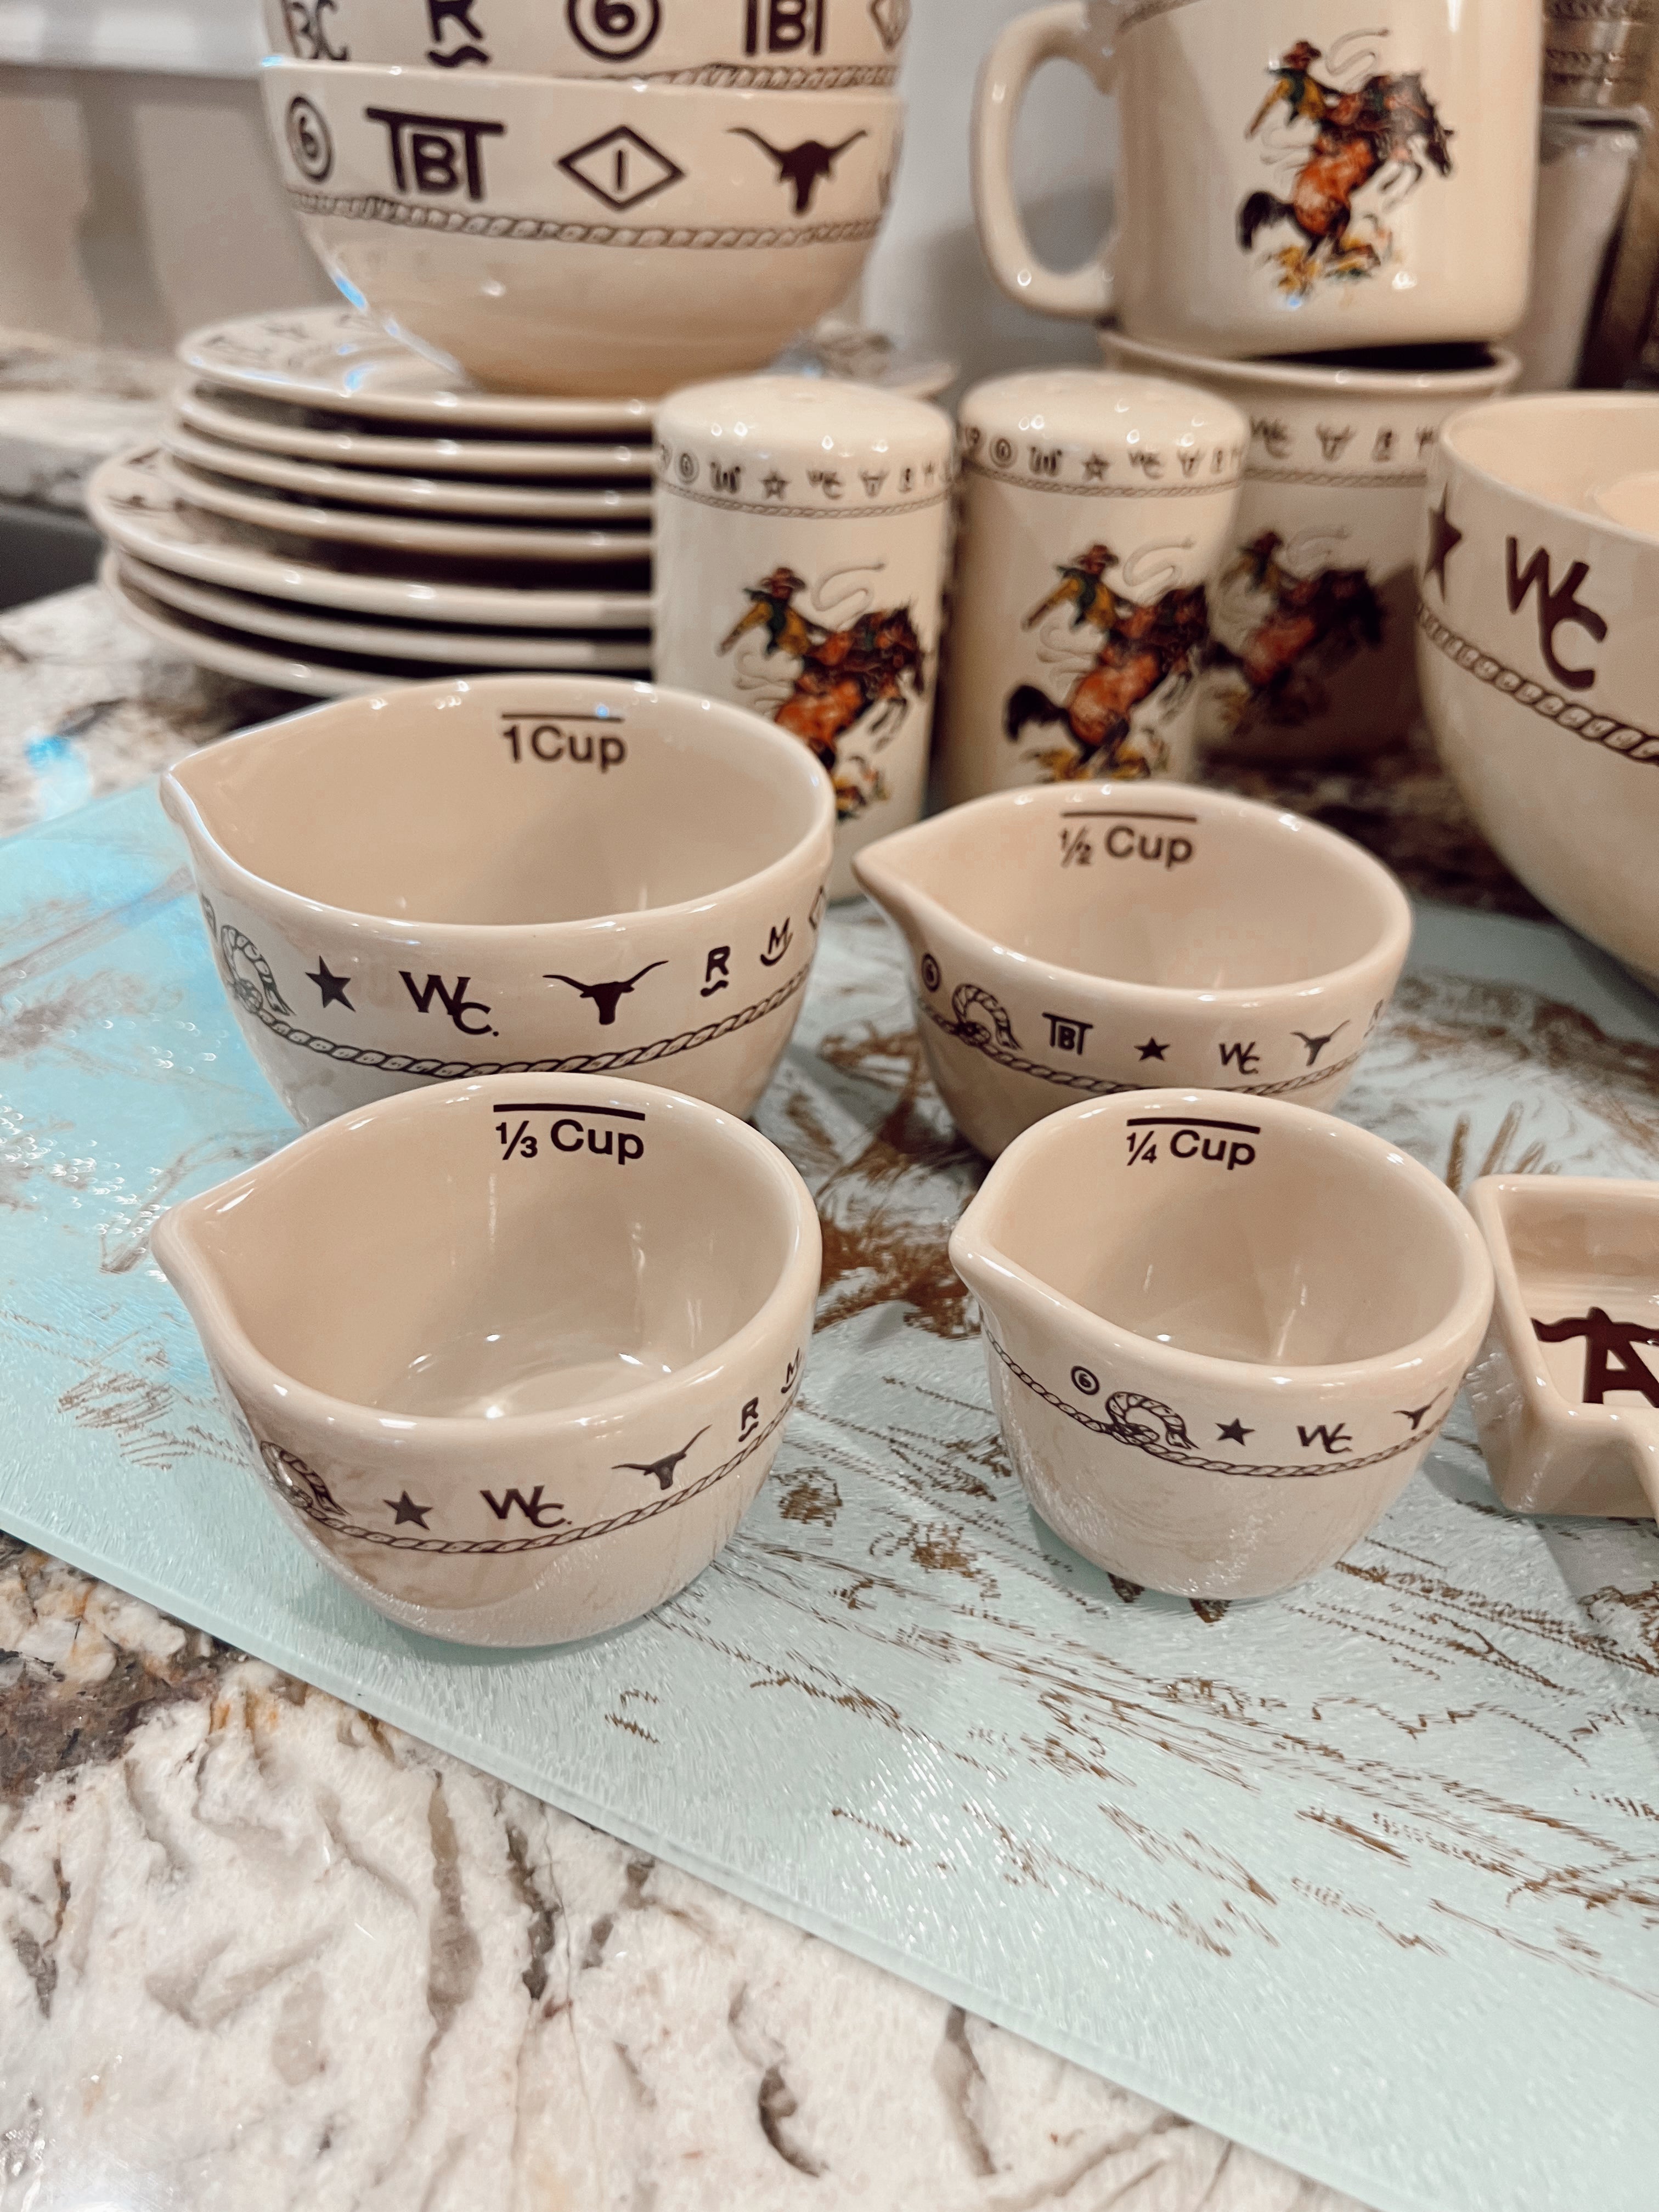 The Branded Measuring Cup Set